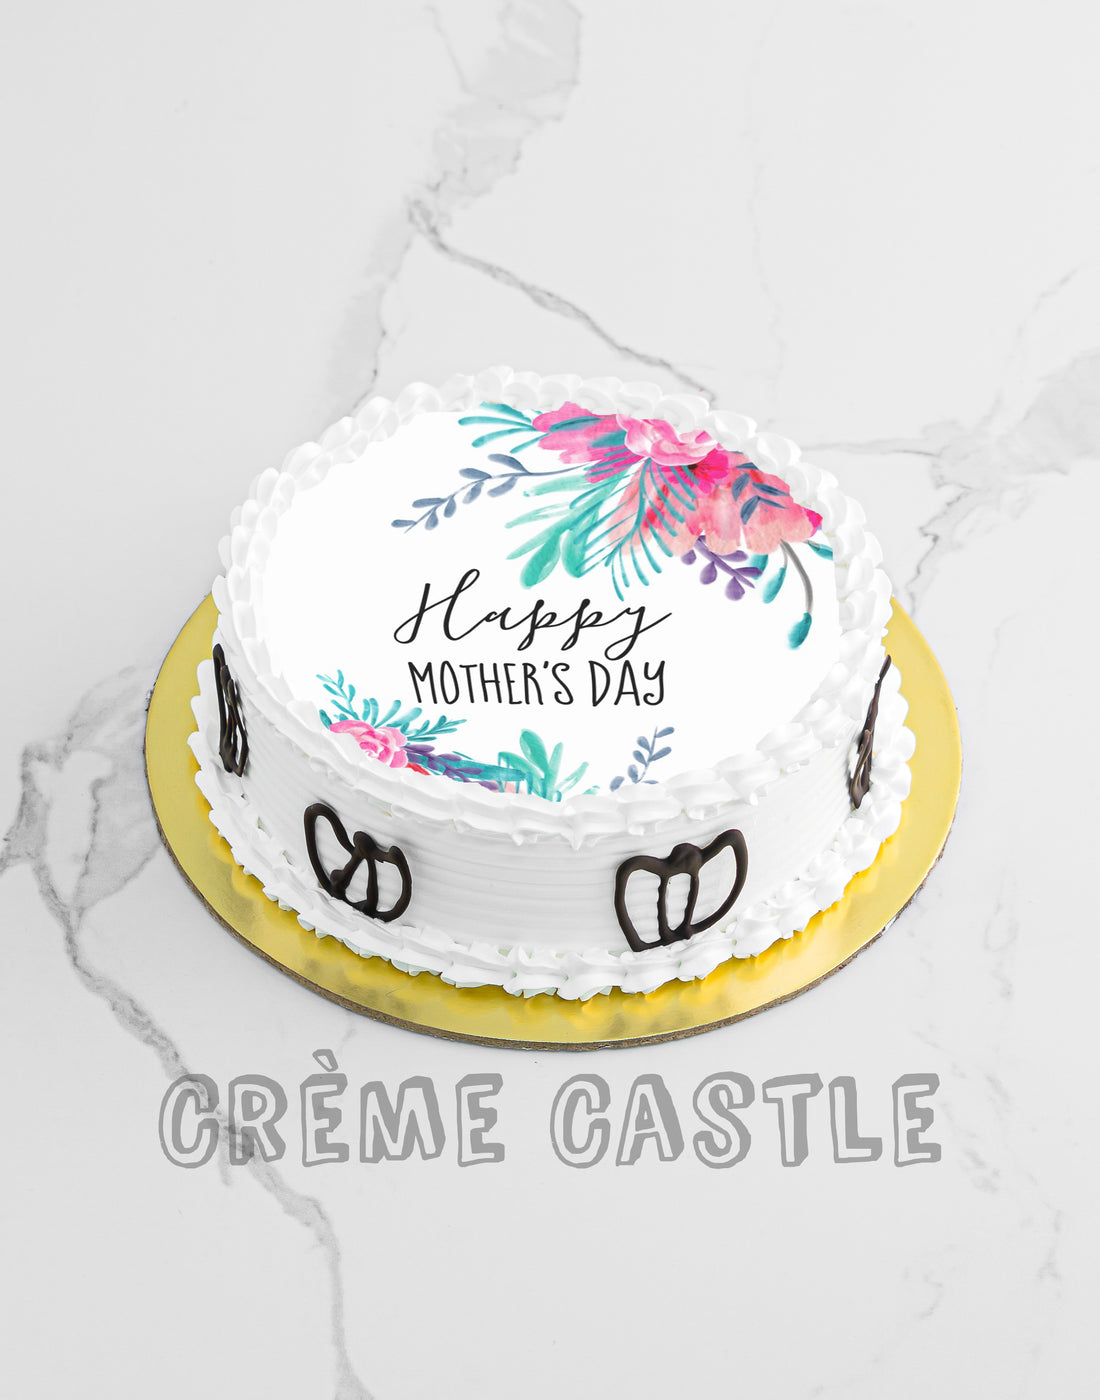 Pastal Mothers Day Cake